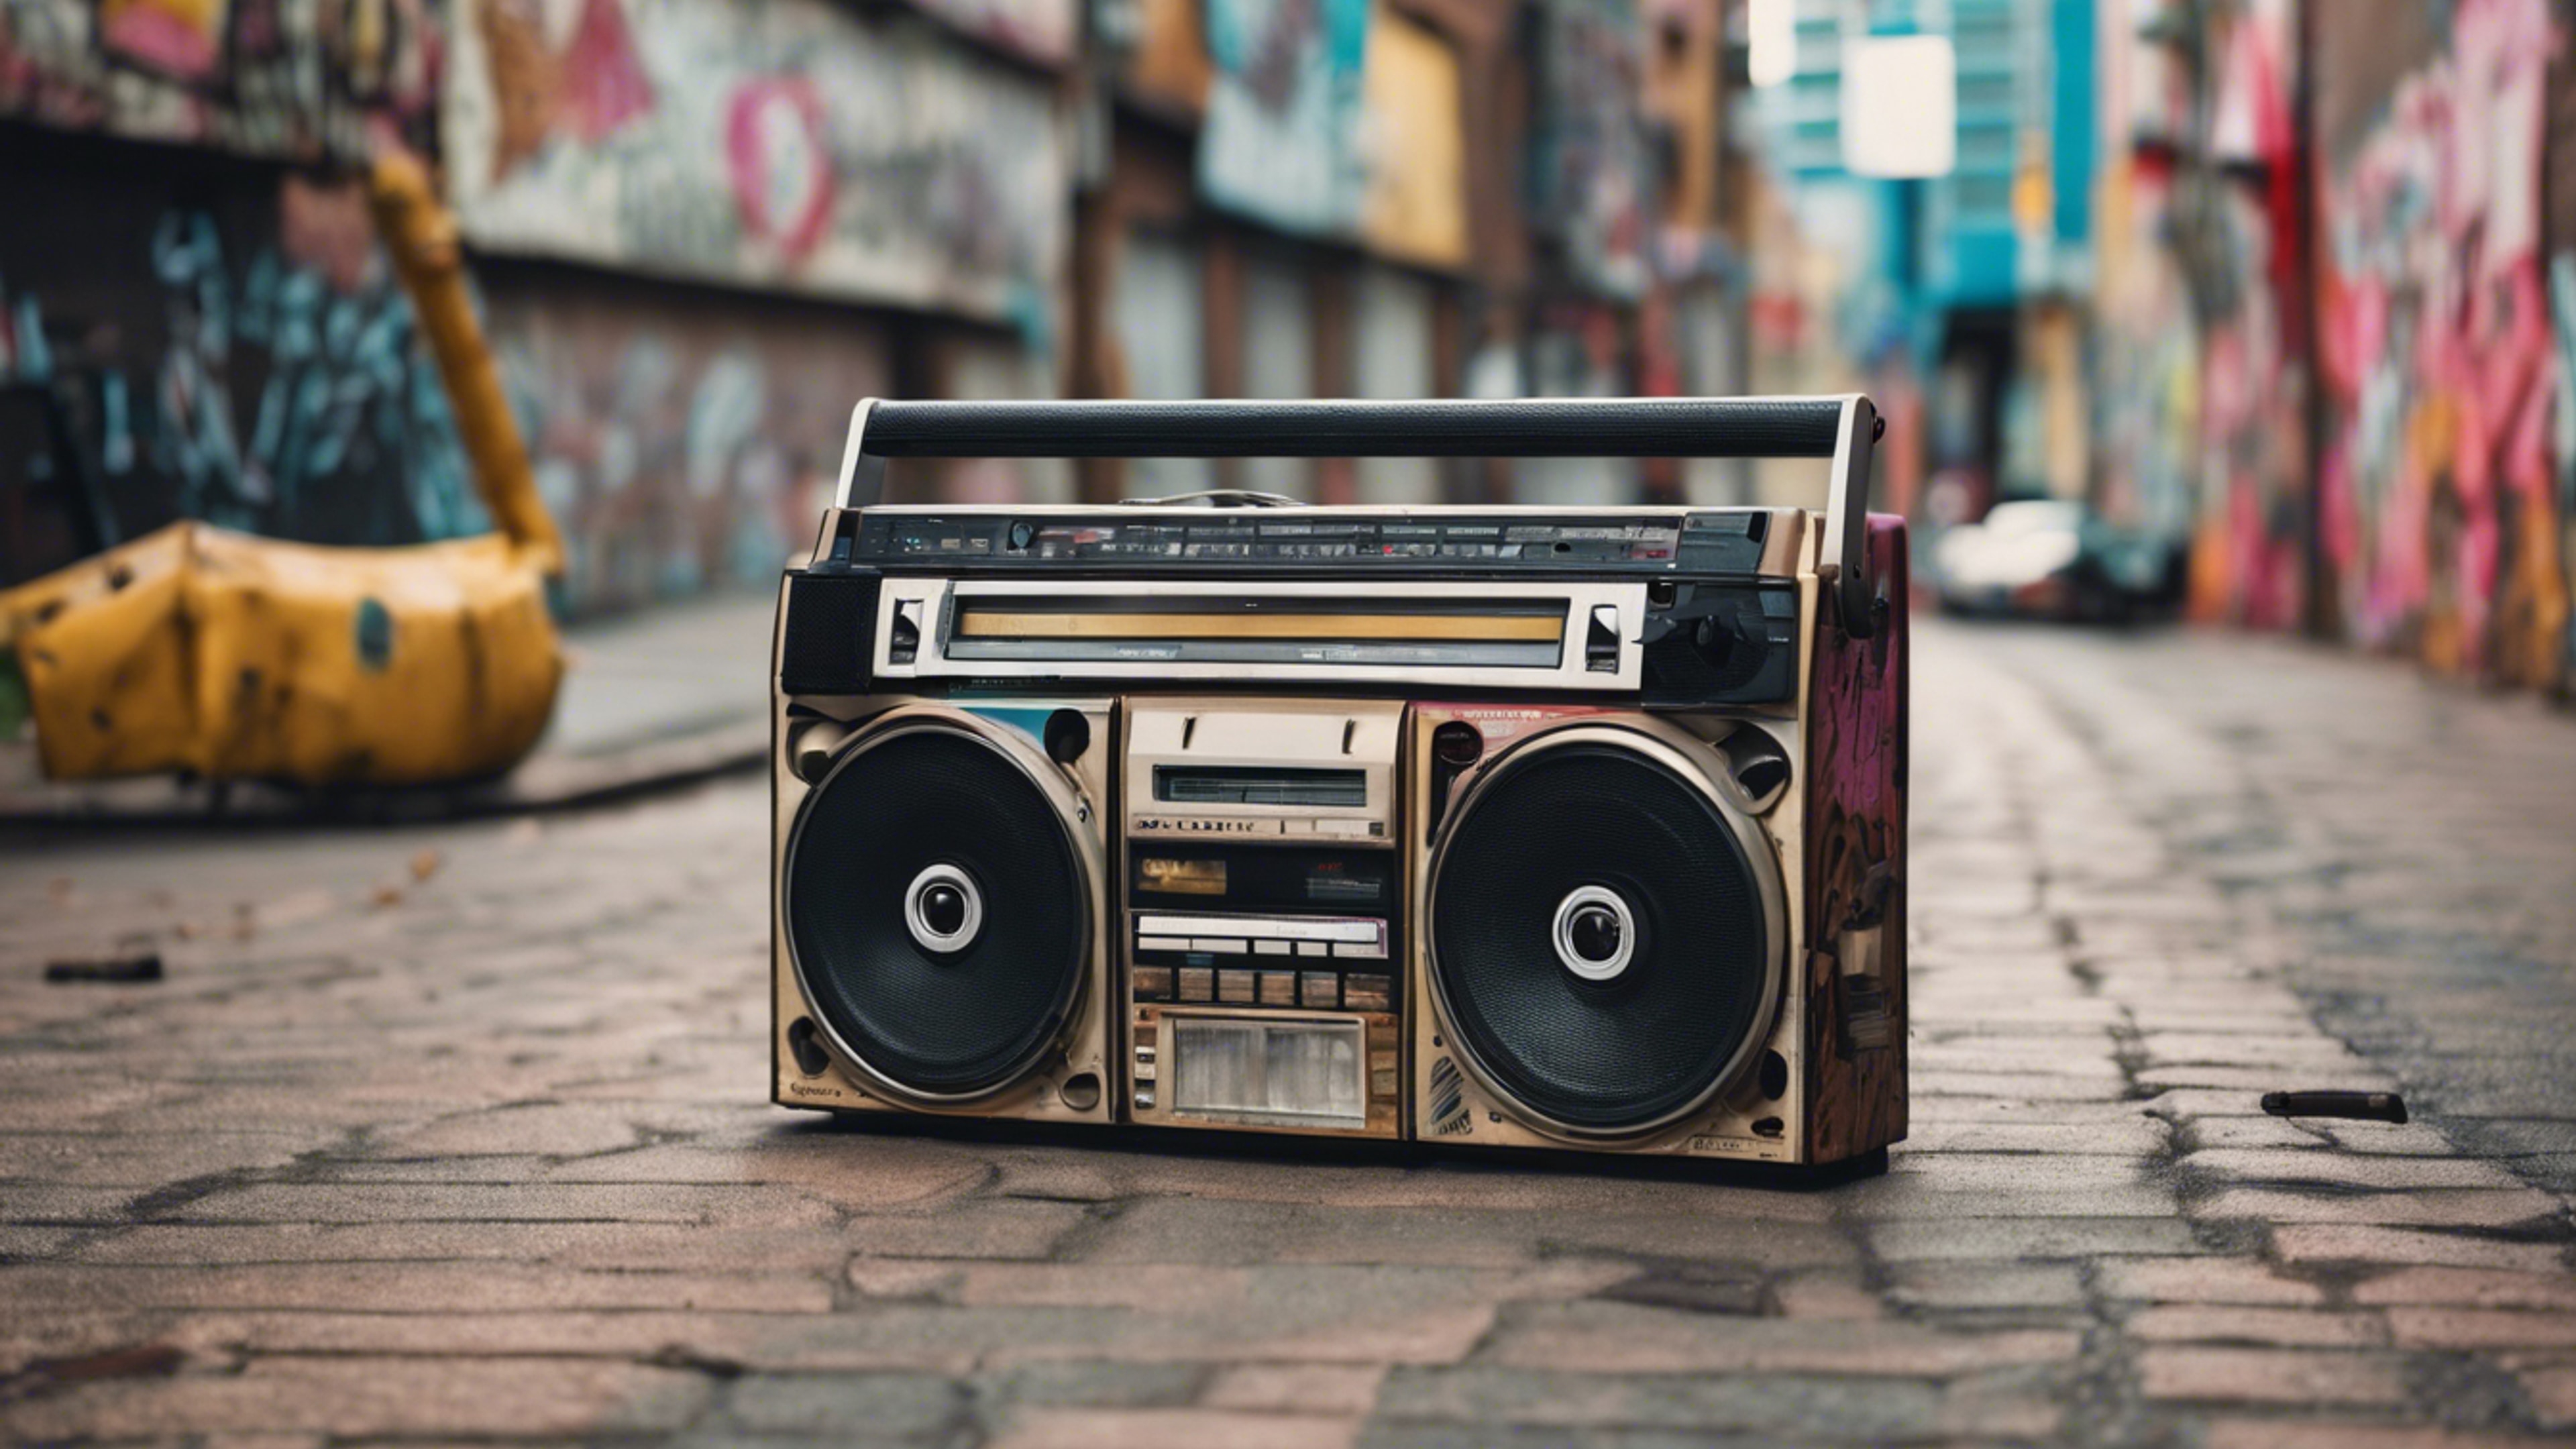 An old school 80s boombox playing cassette tapes on a graffitied street. Tapeet[63e13512f9e44708b5c0]